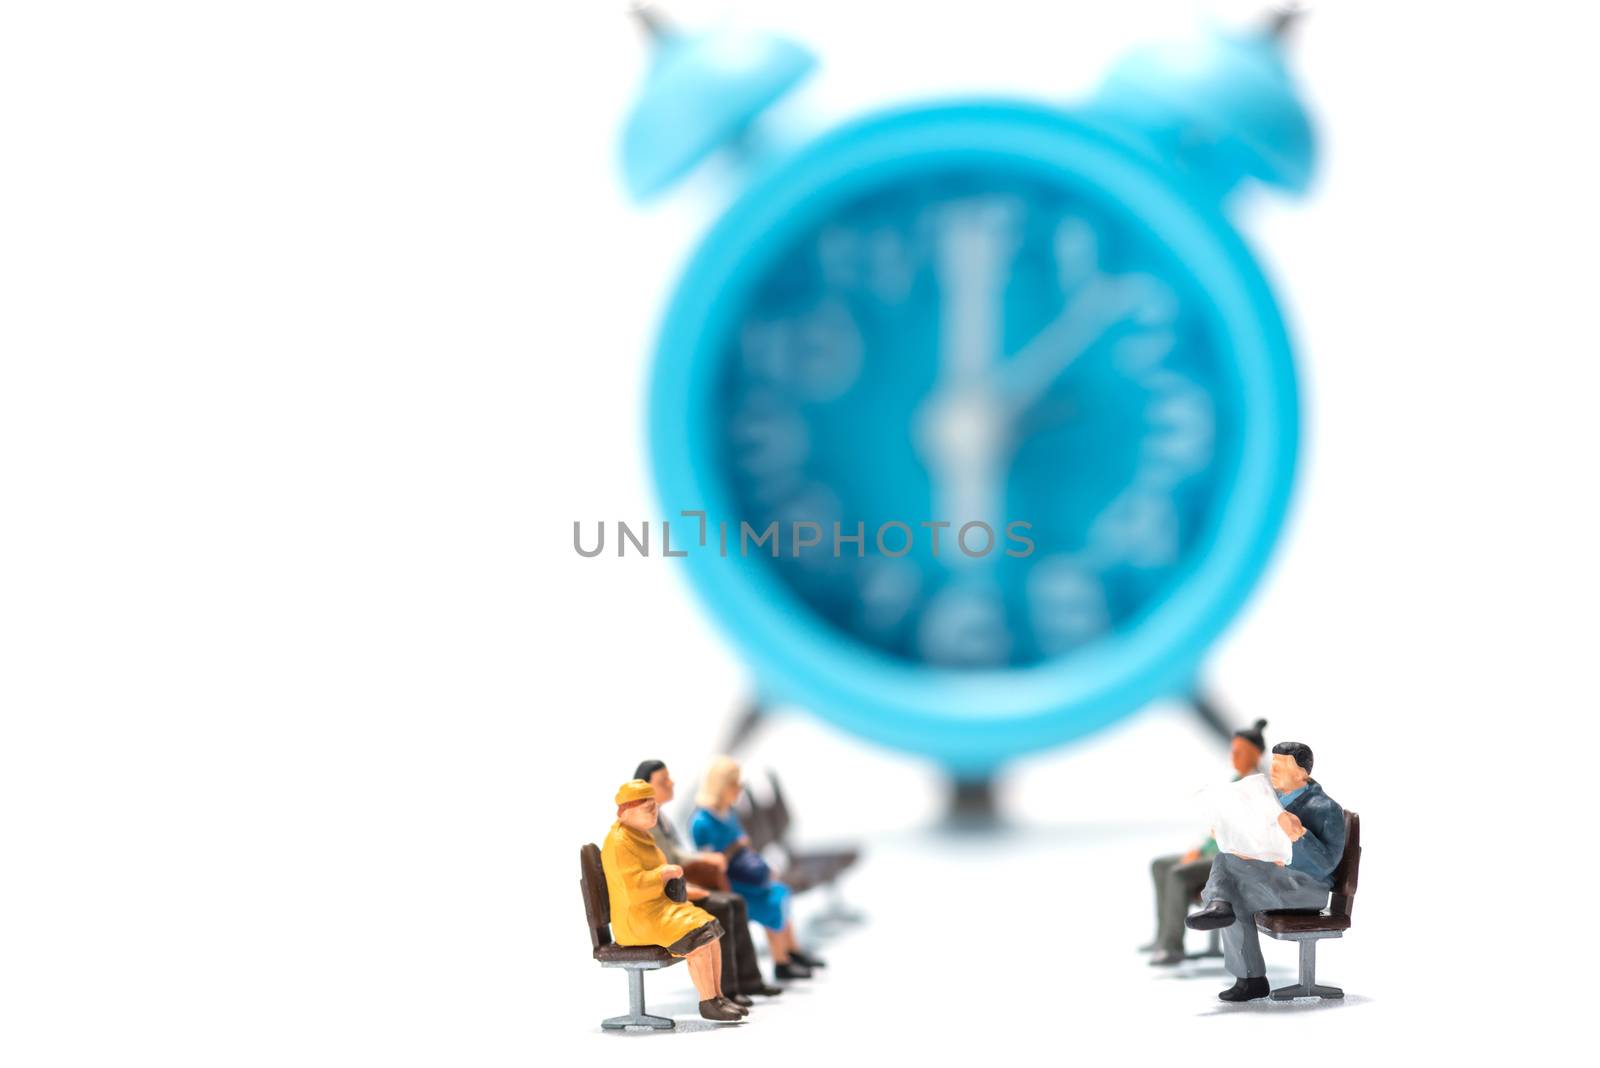 row of miniature people figure sitting on bench with alarm clock background